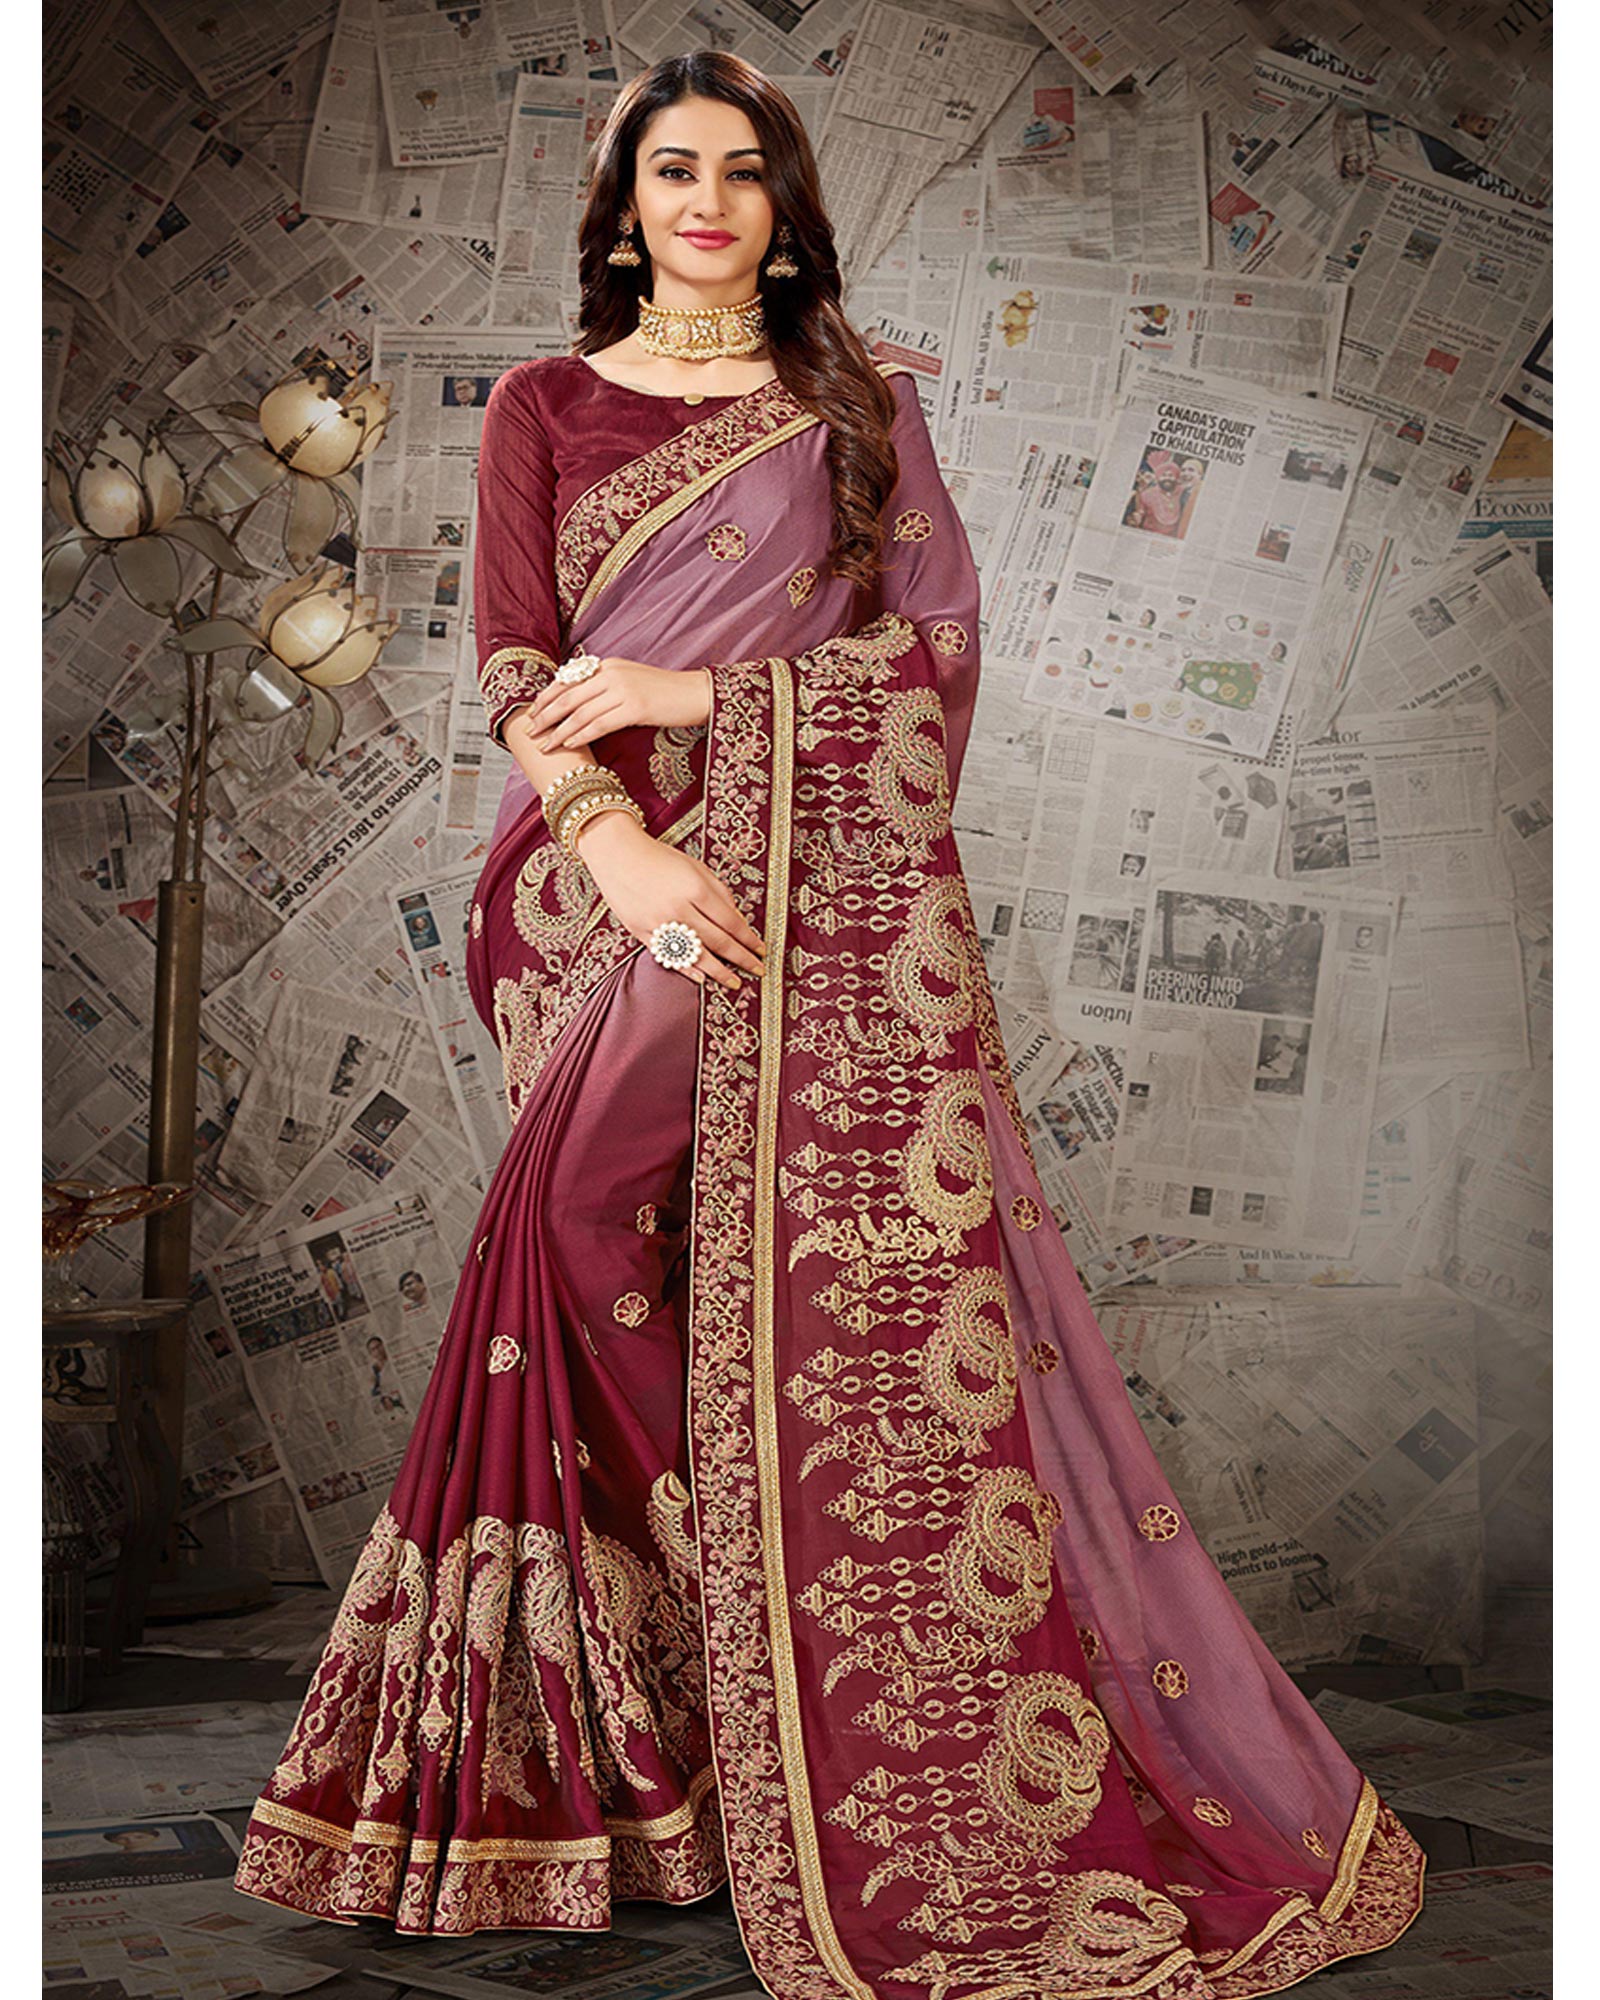 Black Saree with maroon blouse is ever exciting combination. | Saree blouse  designs, Saree designs, Modern saree